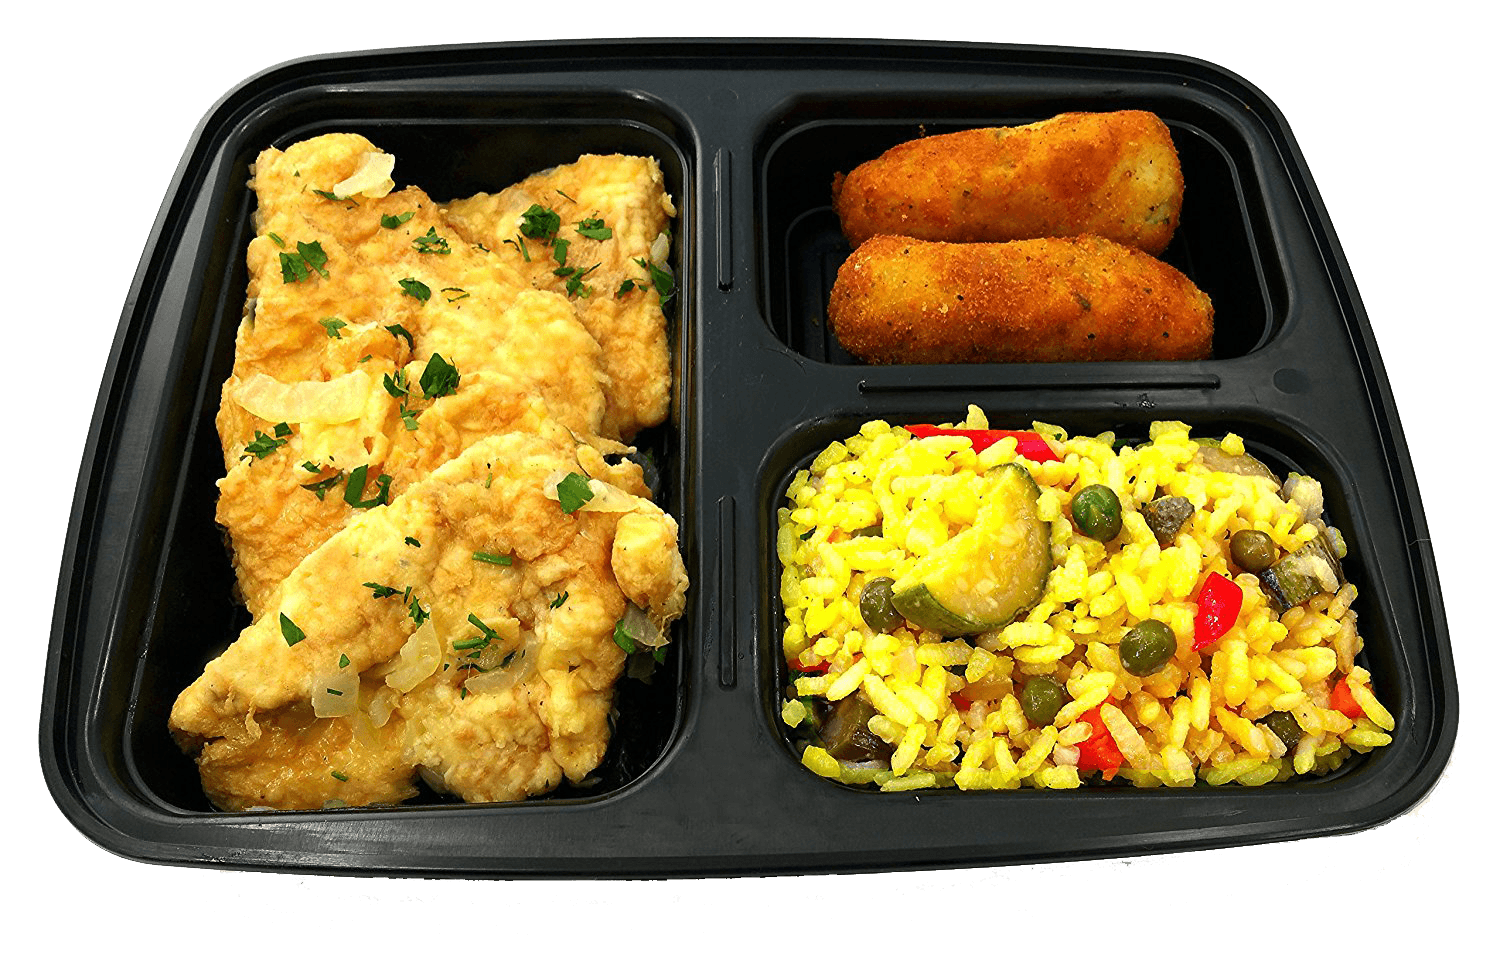 Prepared Food - Fully Cooked Complete Meal Heat And Serve - Chicken Francese, Potato Croquettes And Arborio Rice Made Fresh Daily. - 4 Orders -